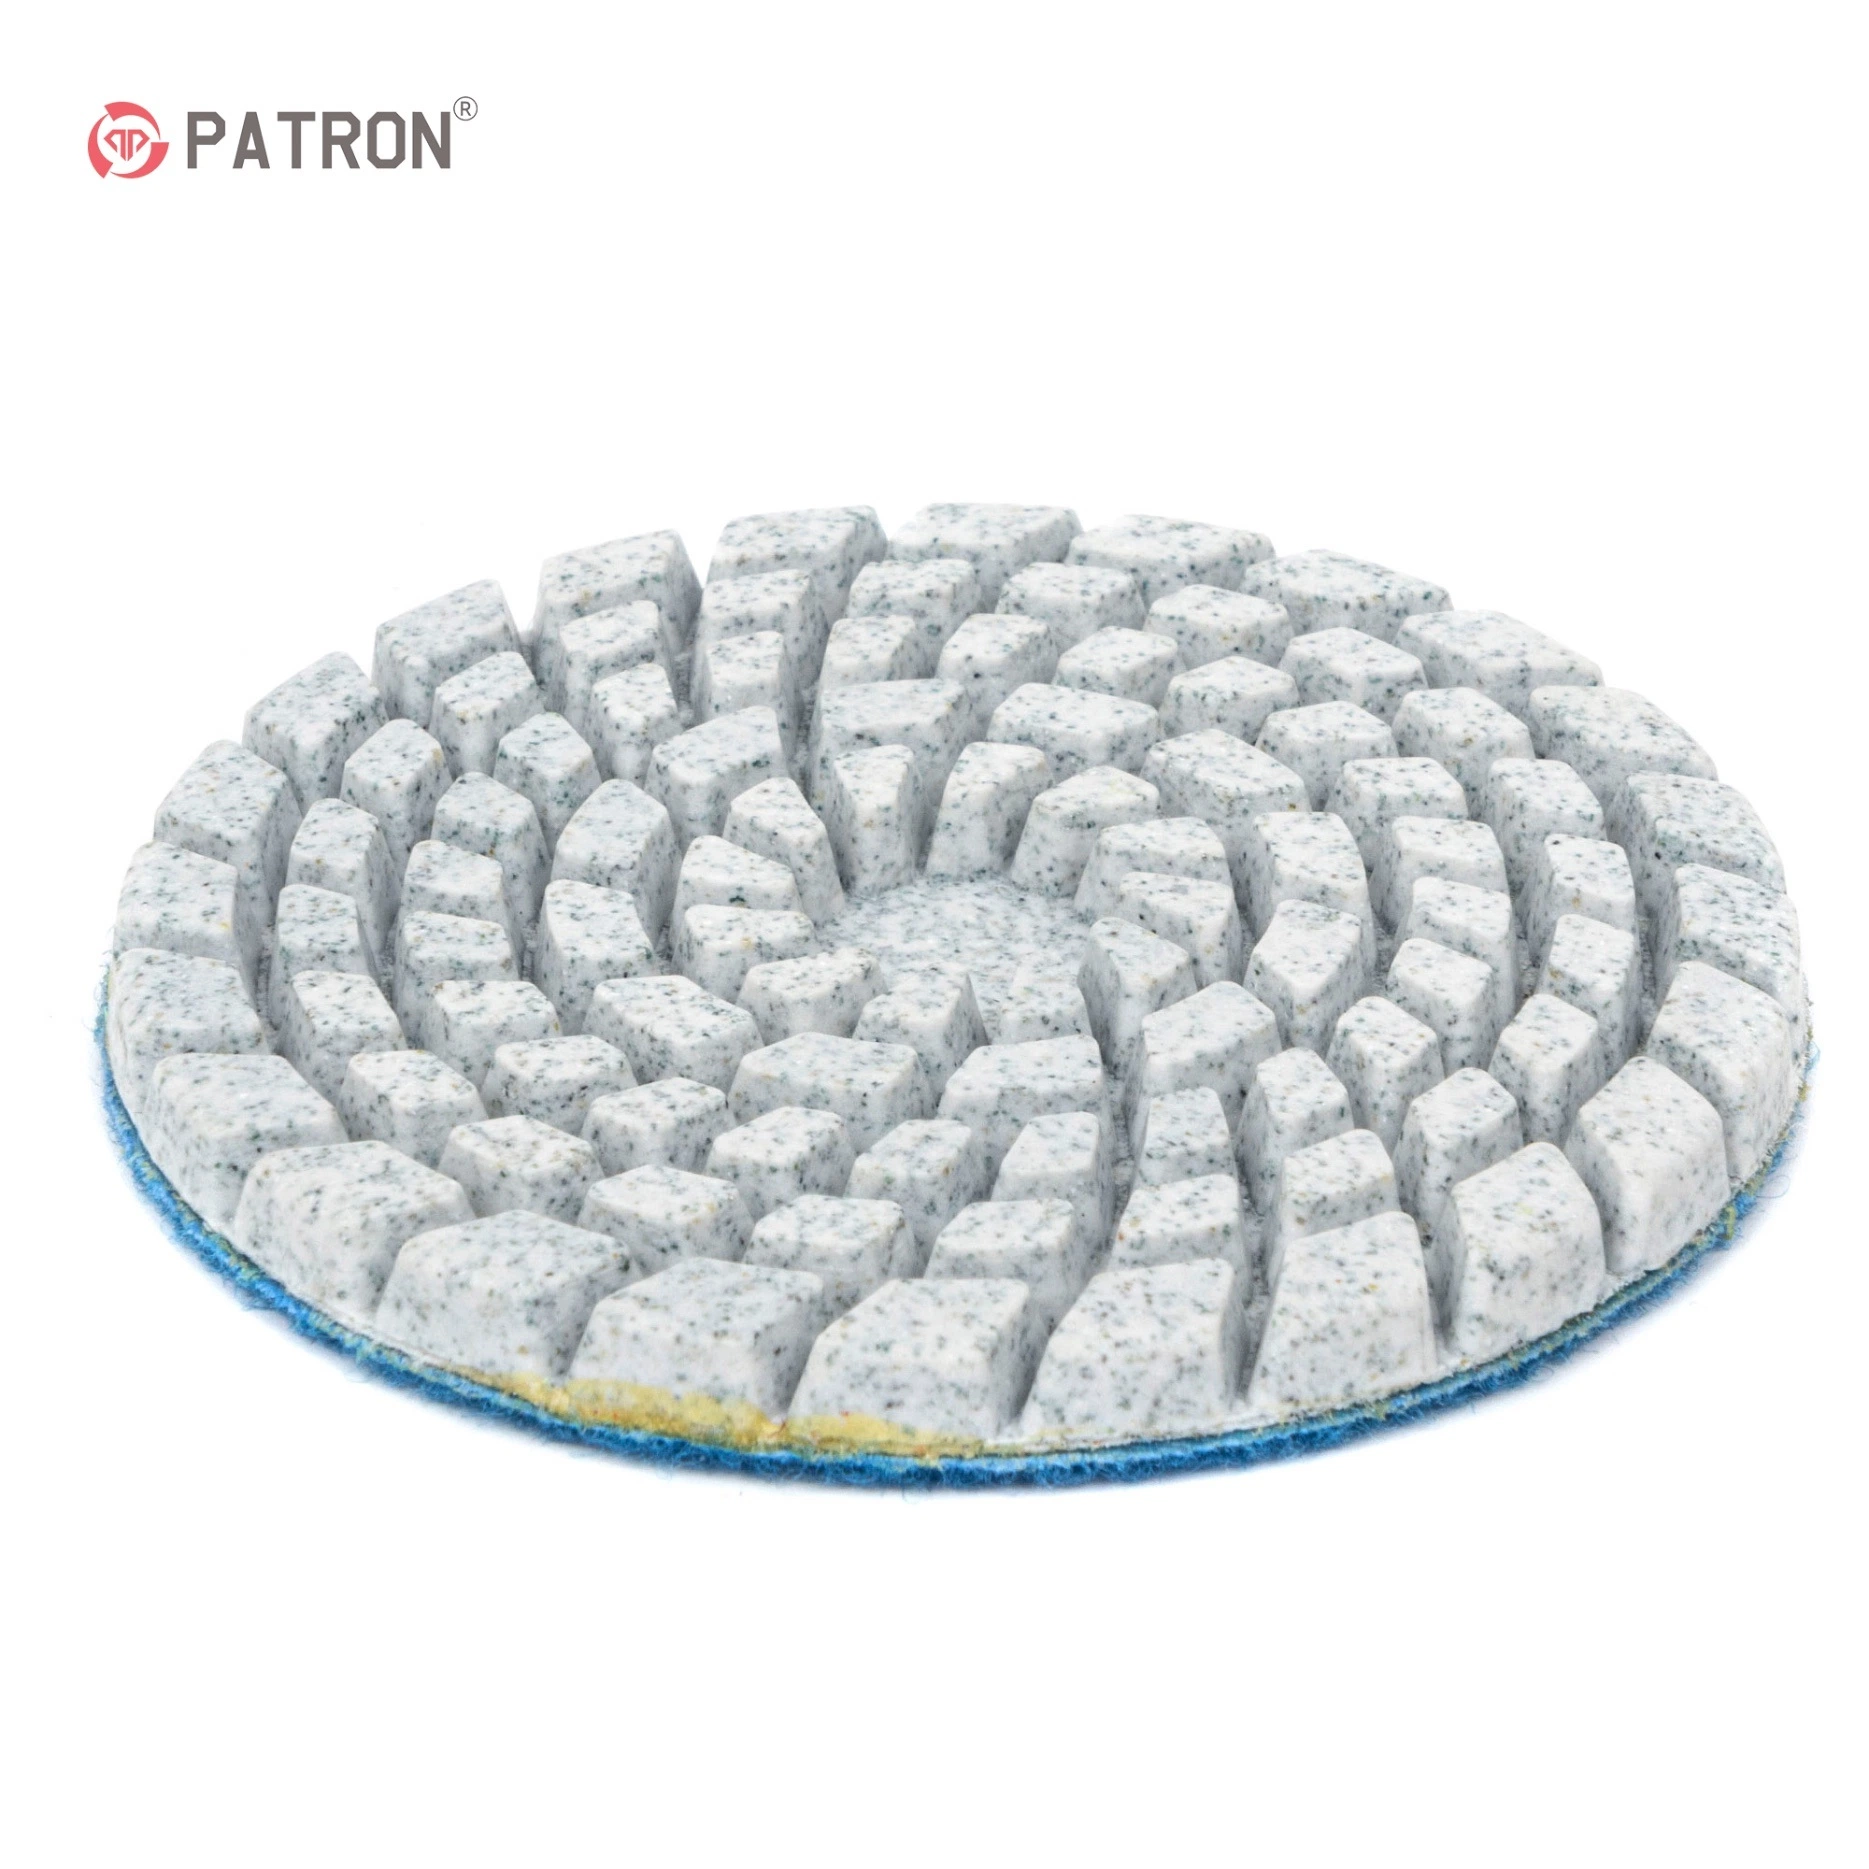 Dry Polishing Stone Pads No Water Diamond Tools for The Stone Grinding Wheel